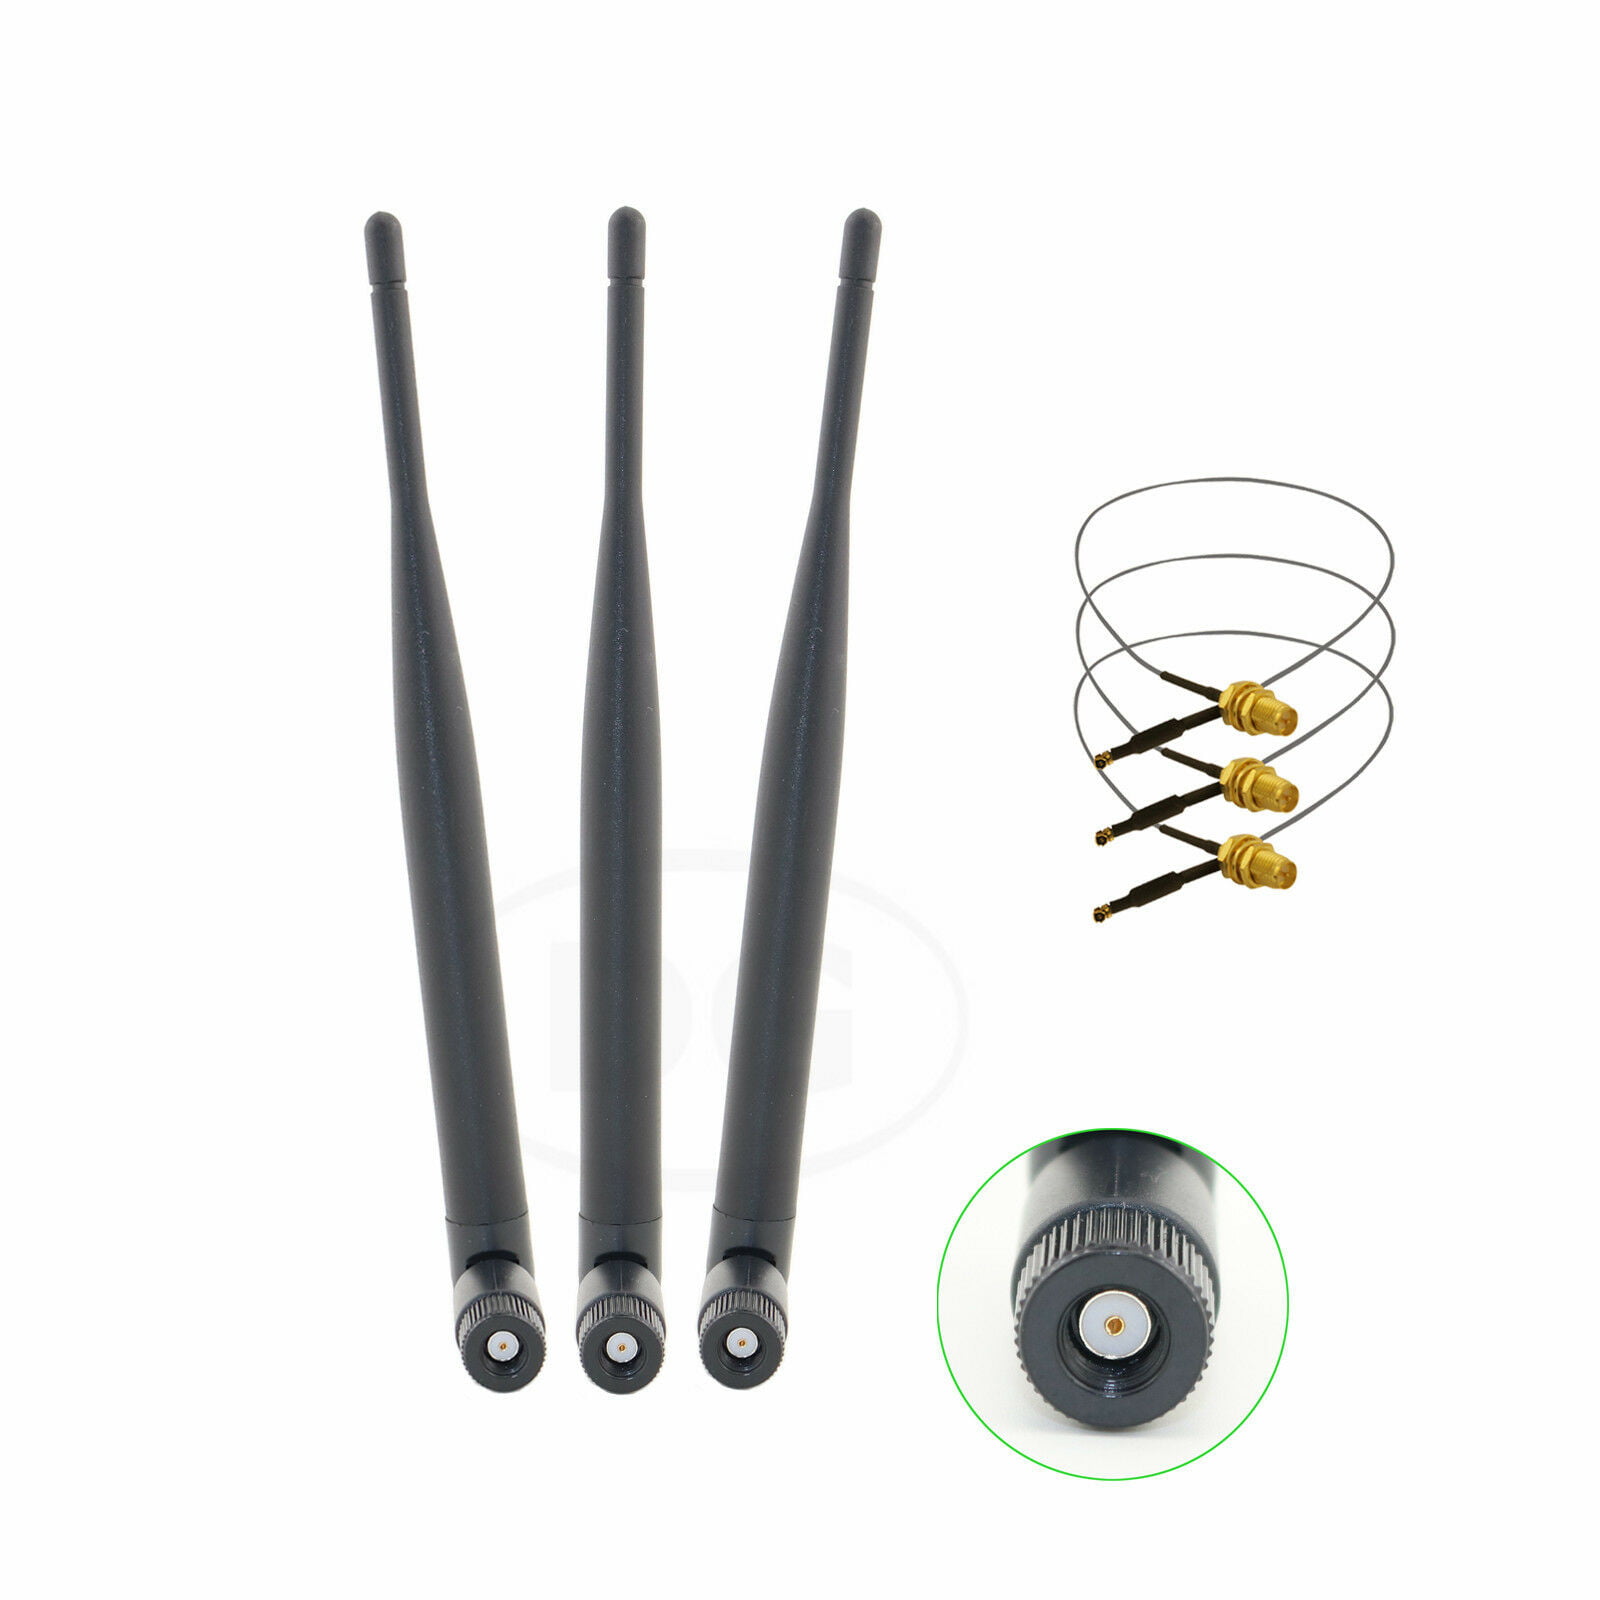 6dBi Dual Band RP-SMA WiFi Antenna Mod Kit for Wireless Routers 